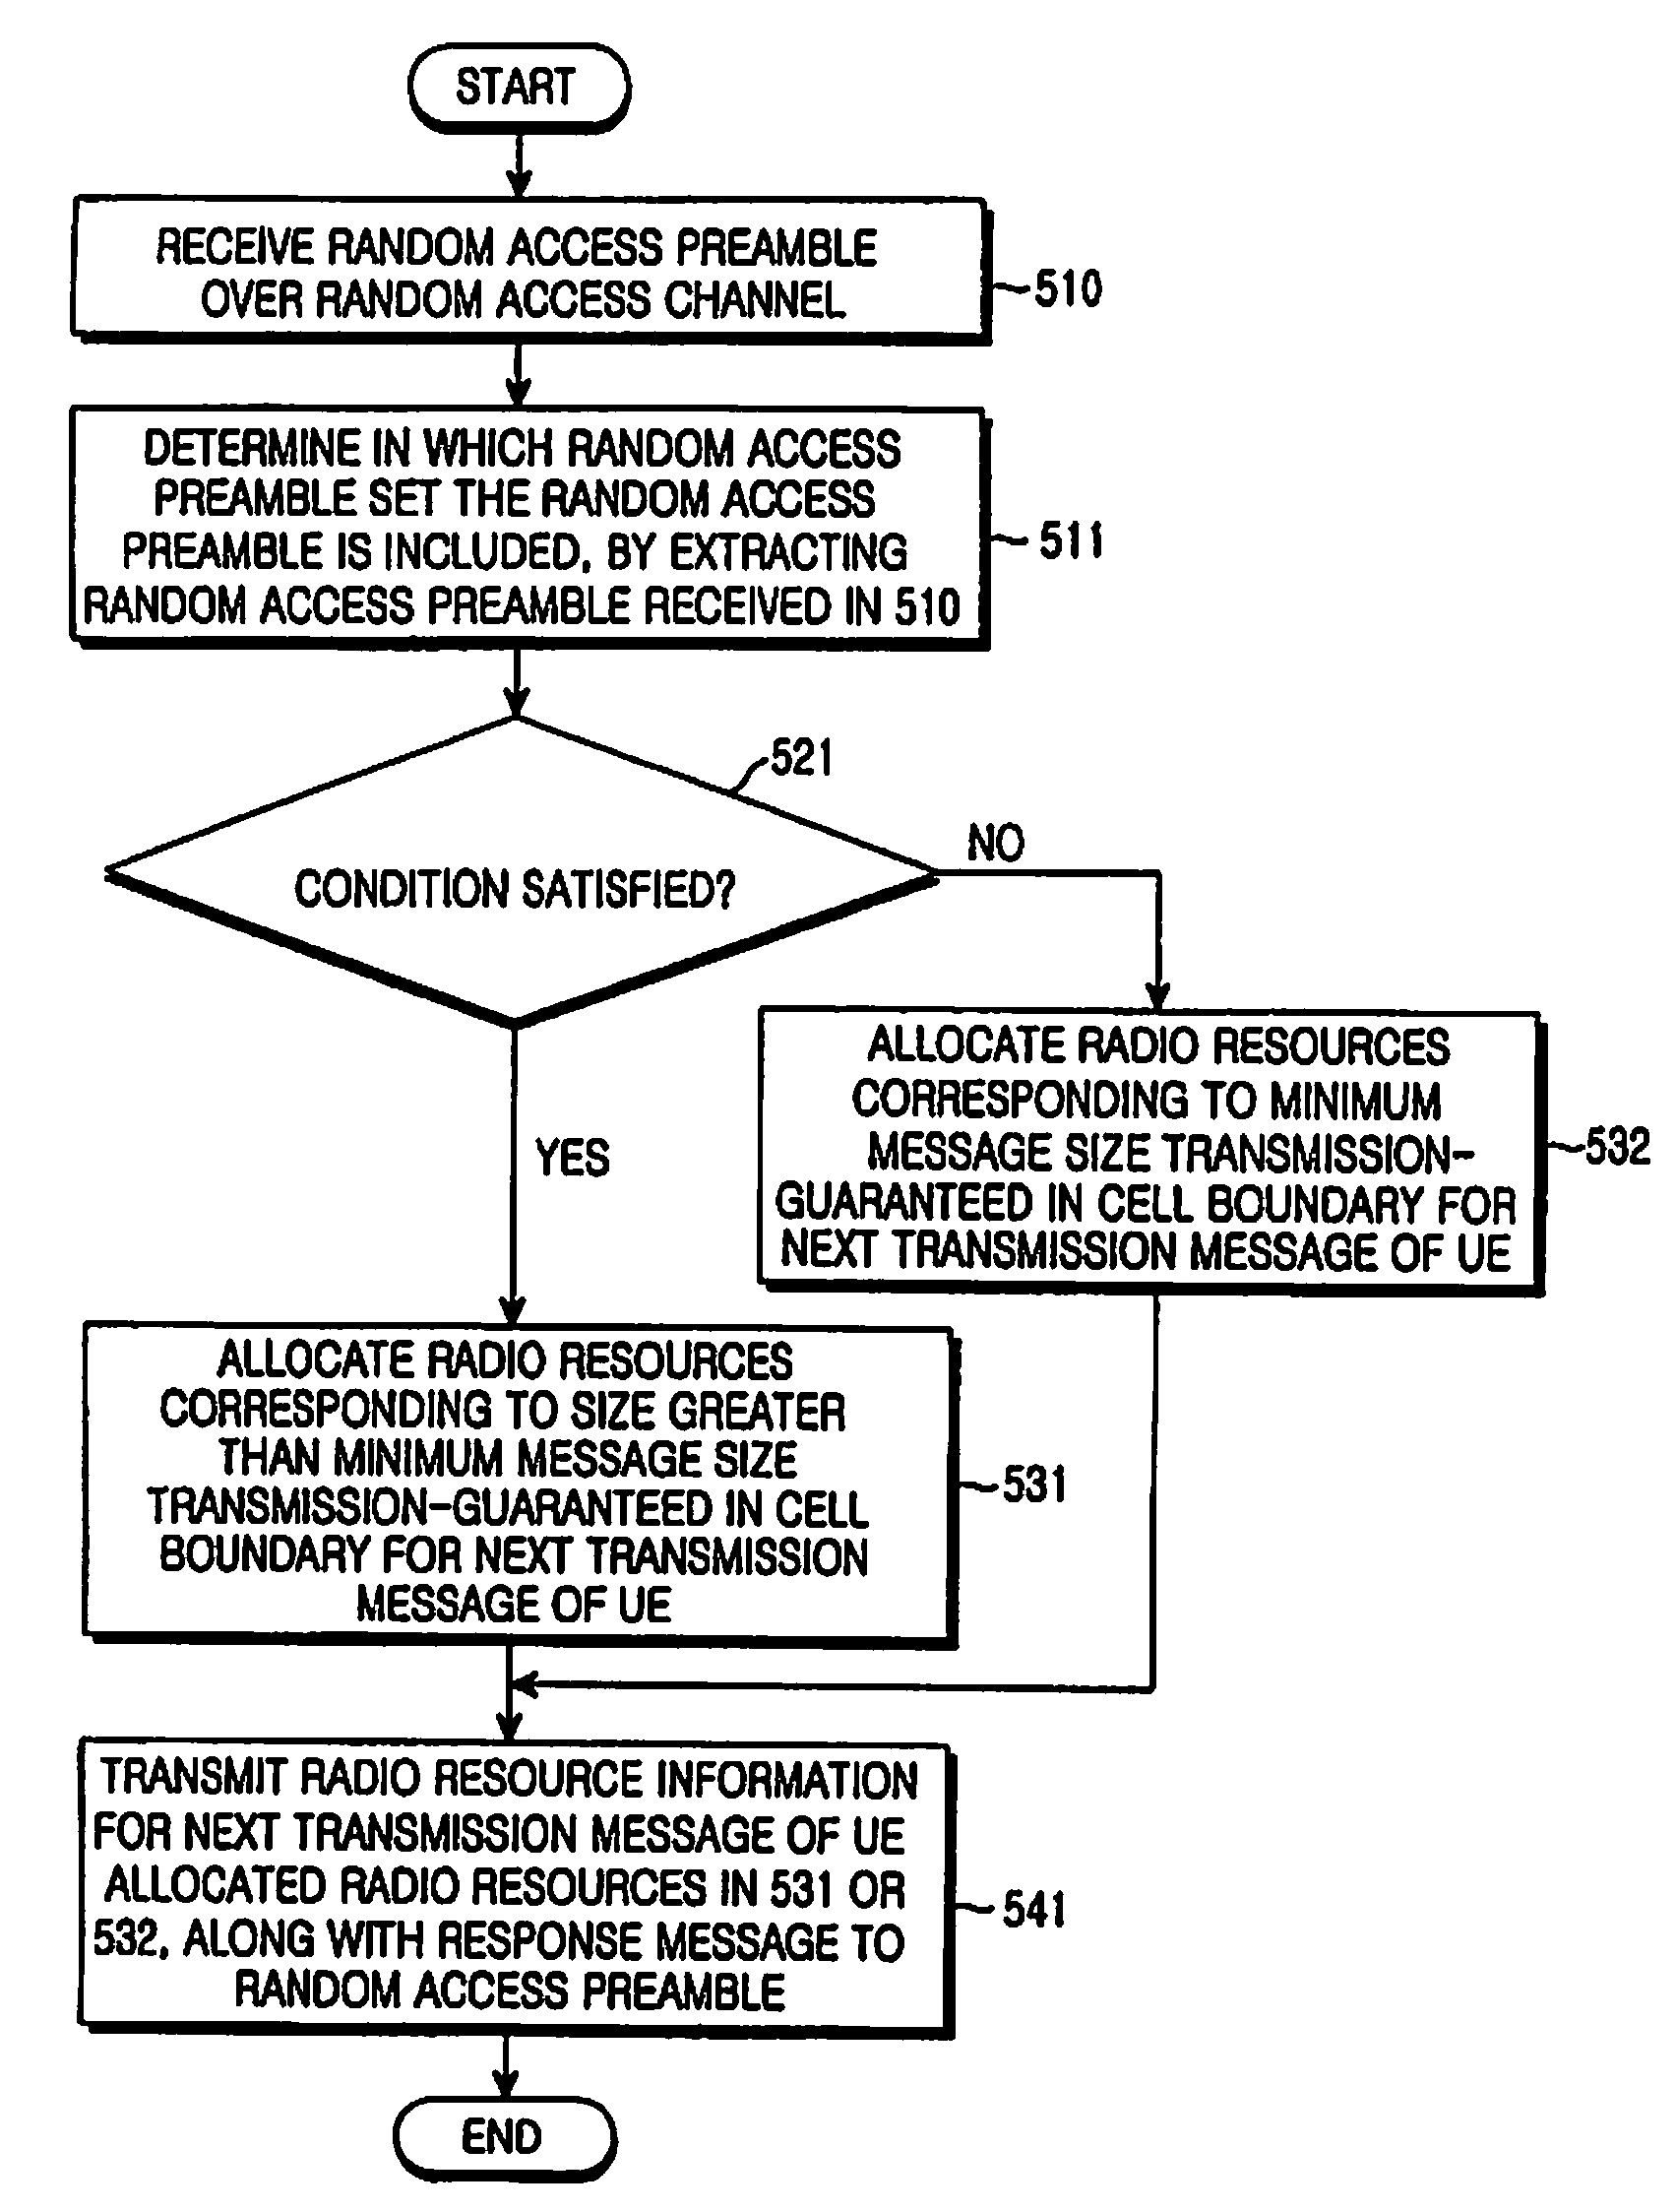 Method and apparatus for allocating radio resource using random access procedure in a mobile communication system